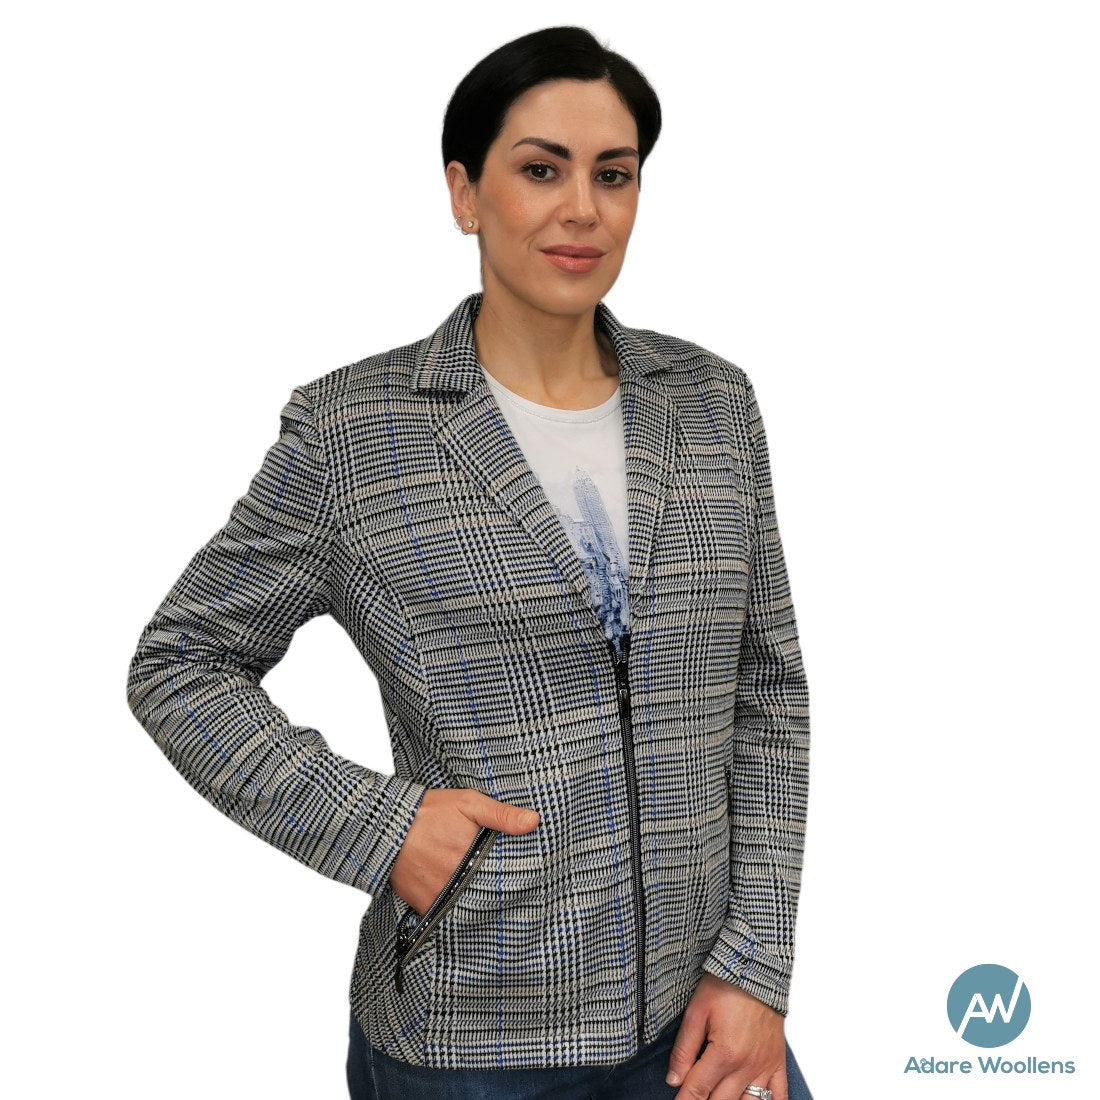 Jacket by Woollens Check – Rabe 45-123230 Navy Adare Moden 390